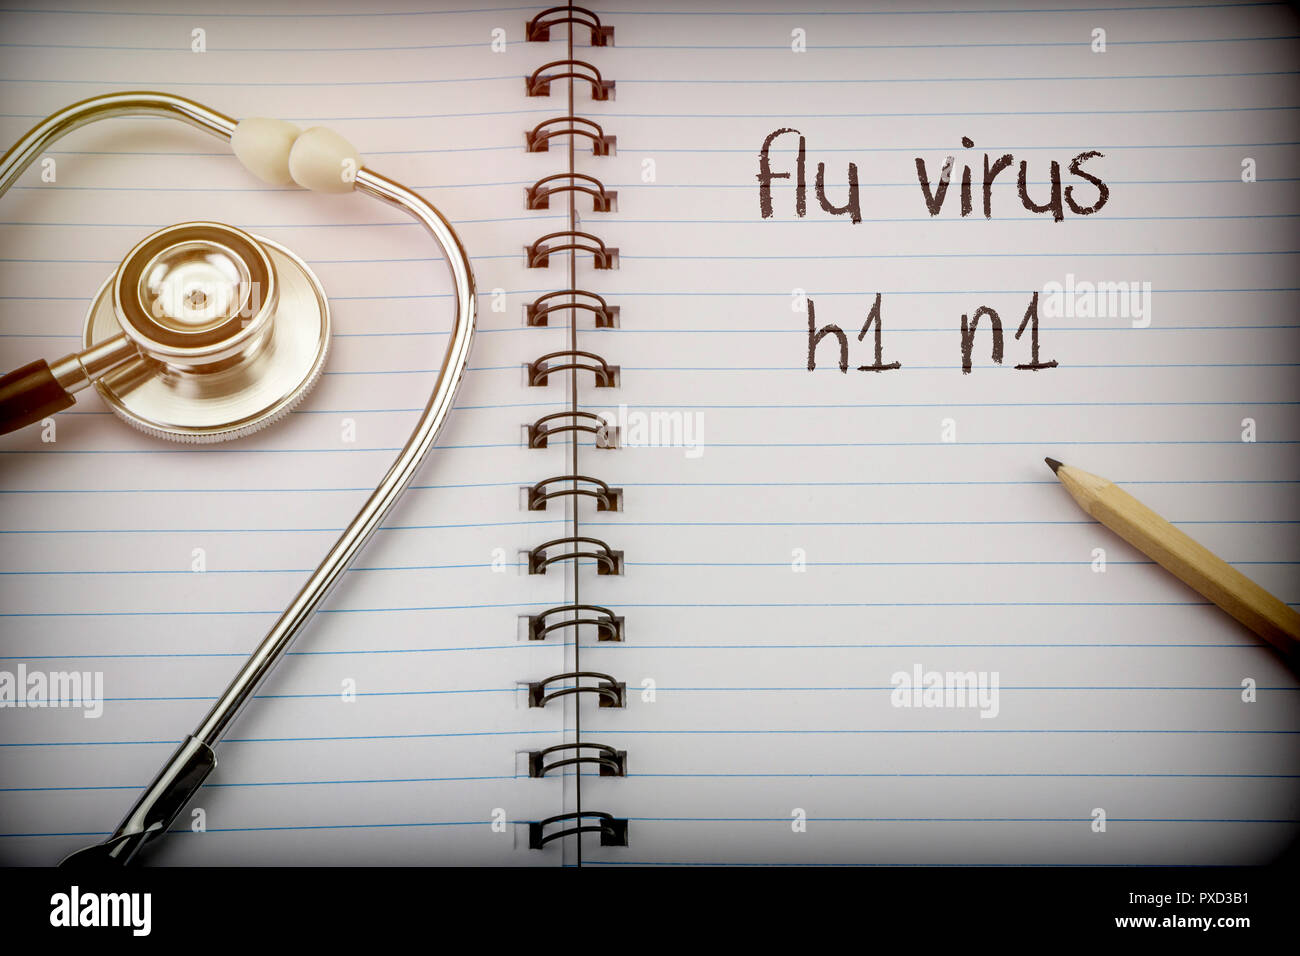 Stethoscope on notebook and pencil with flu virus h1 n1 words as Stock Photo